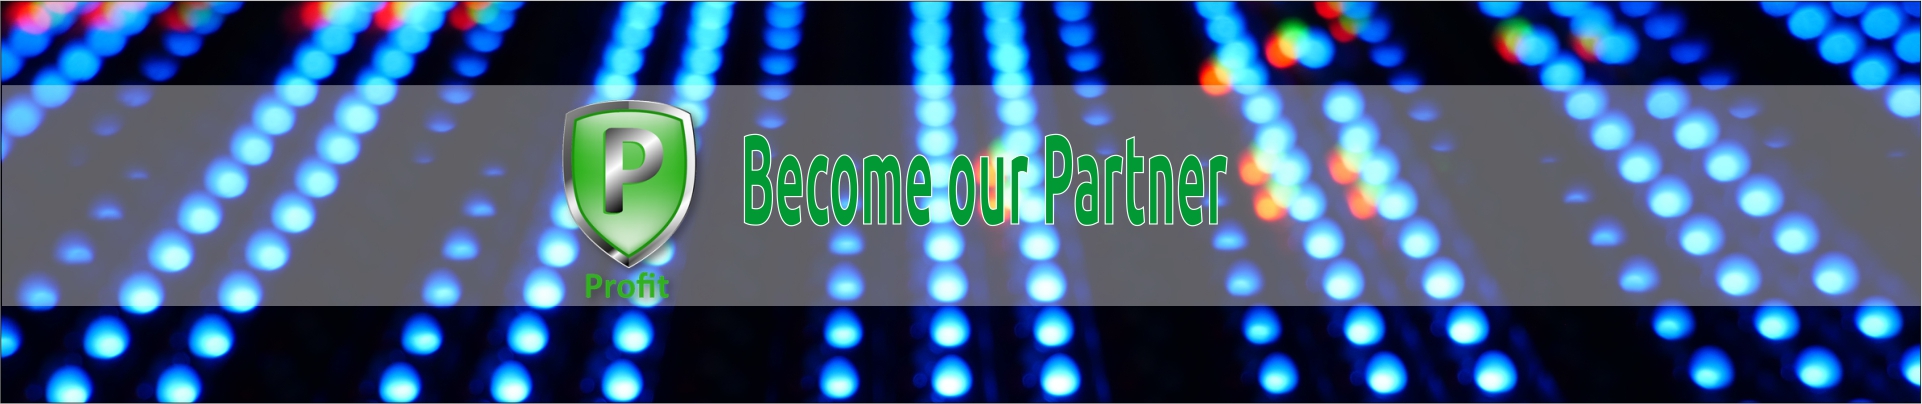 Ledtechnology_Become our Partner